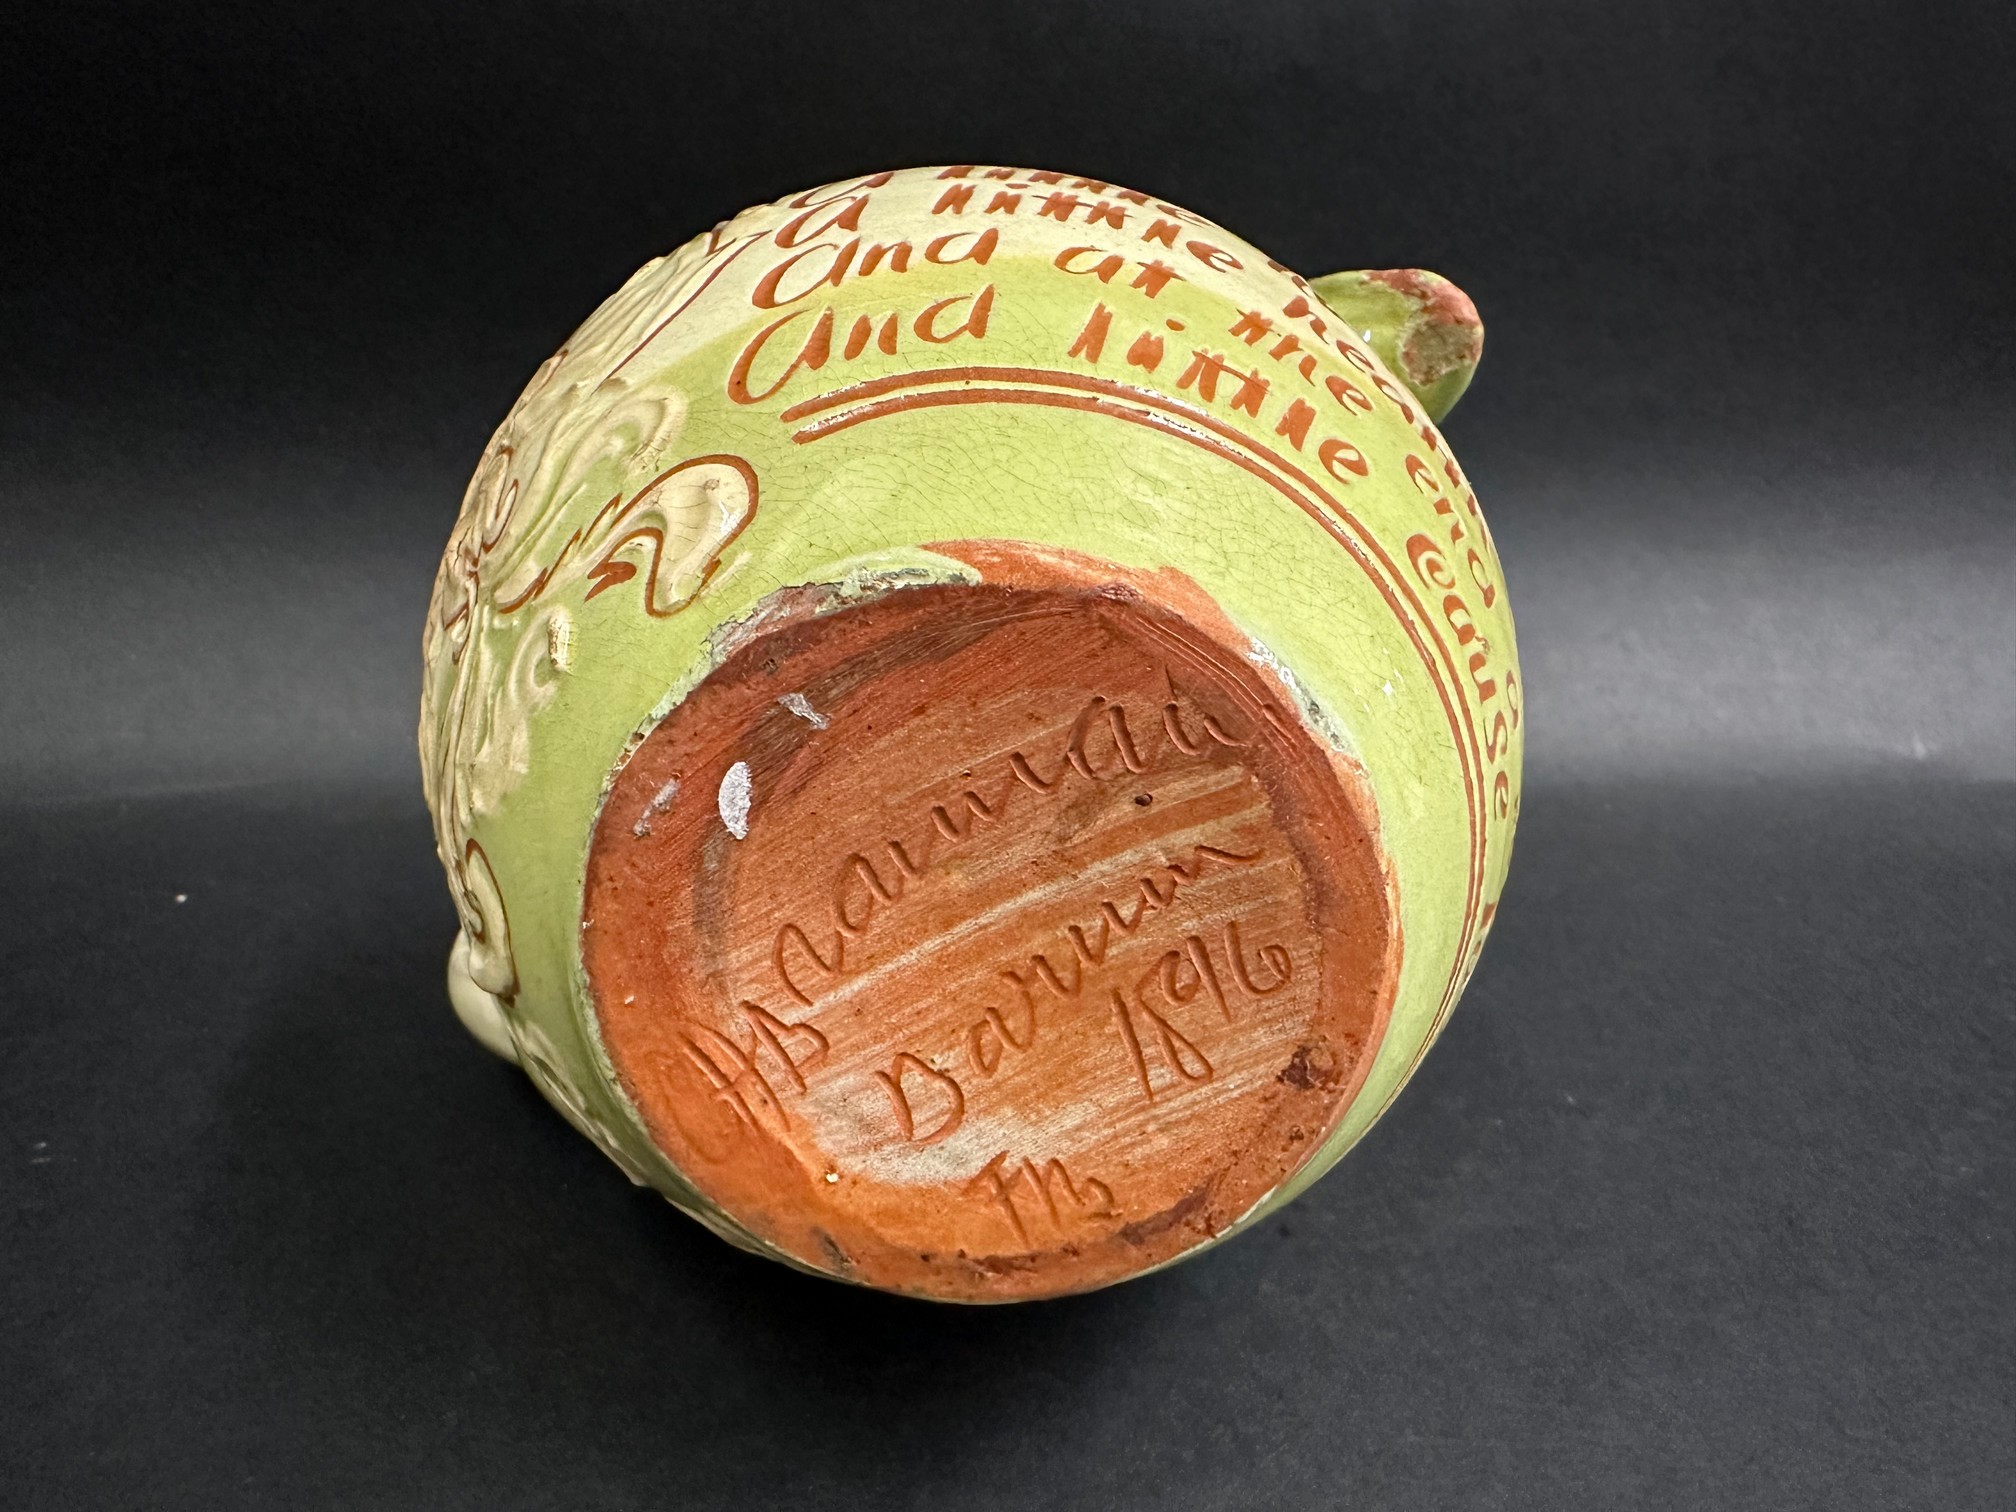 A rare 'The Great Dunlop Tyre Deal of Five Millions' Branham Pottery jug, circa 1896. - Image 5 of 5